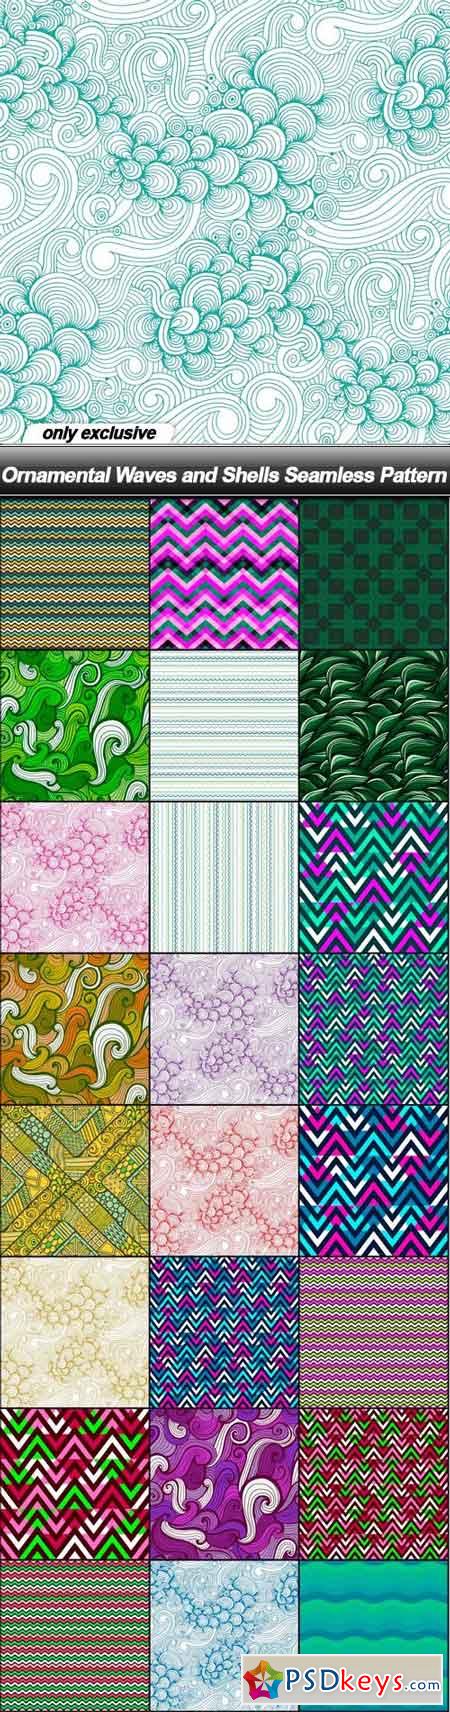 Ornamental Waves and Shells Seamless Pattern - 25 EPS